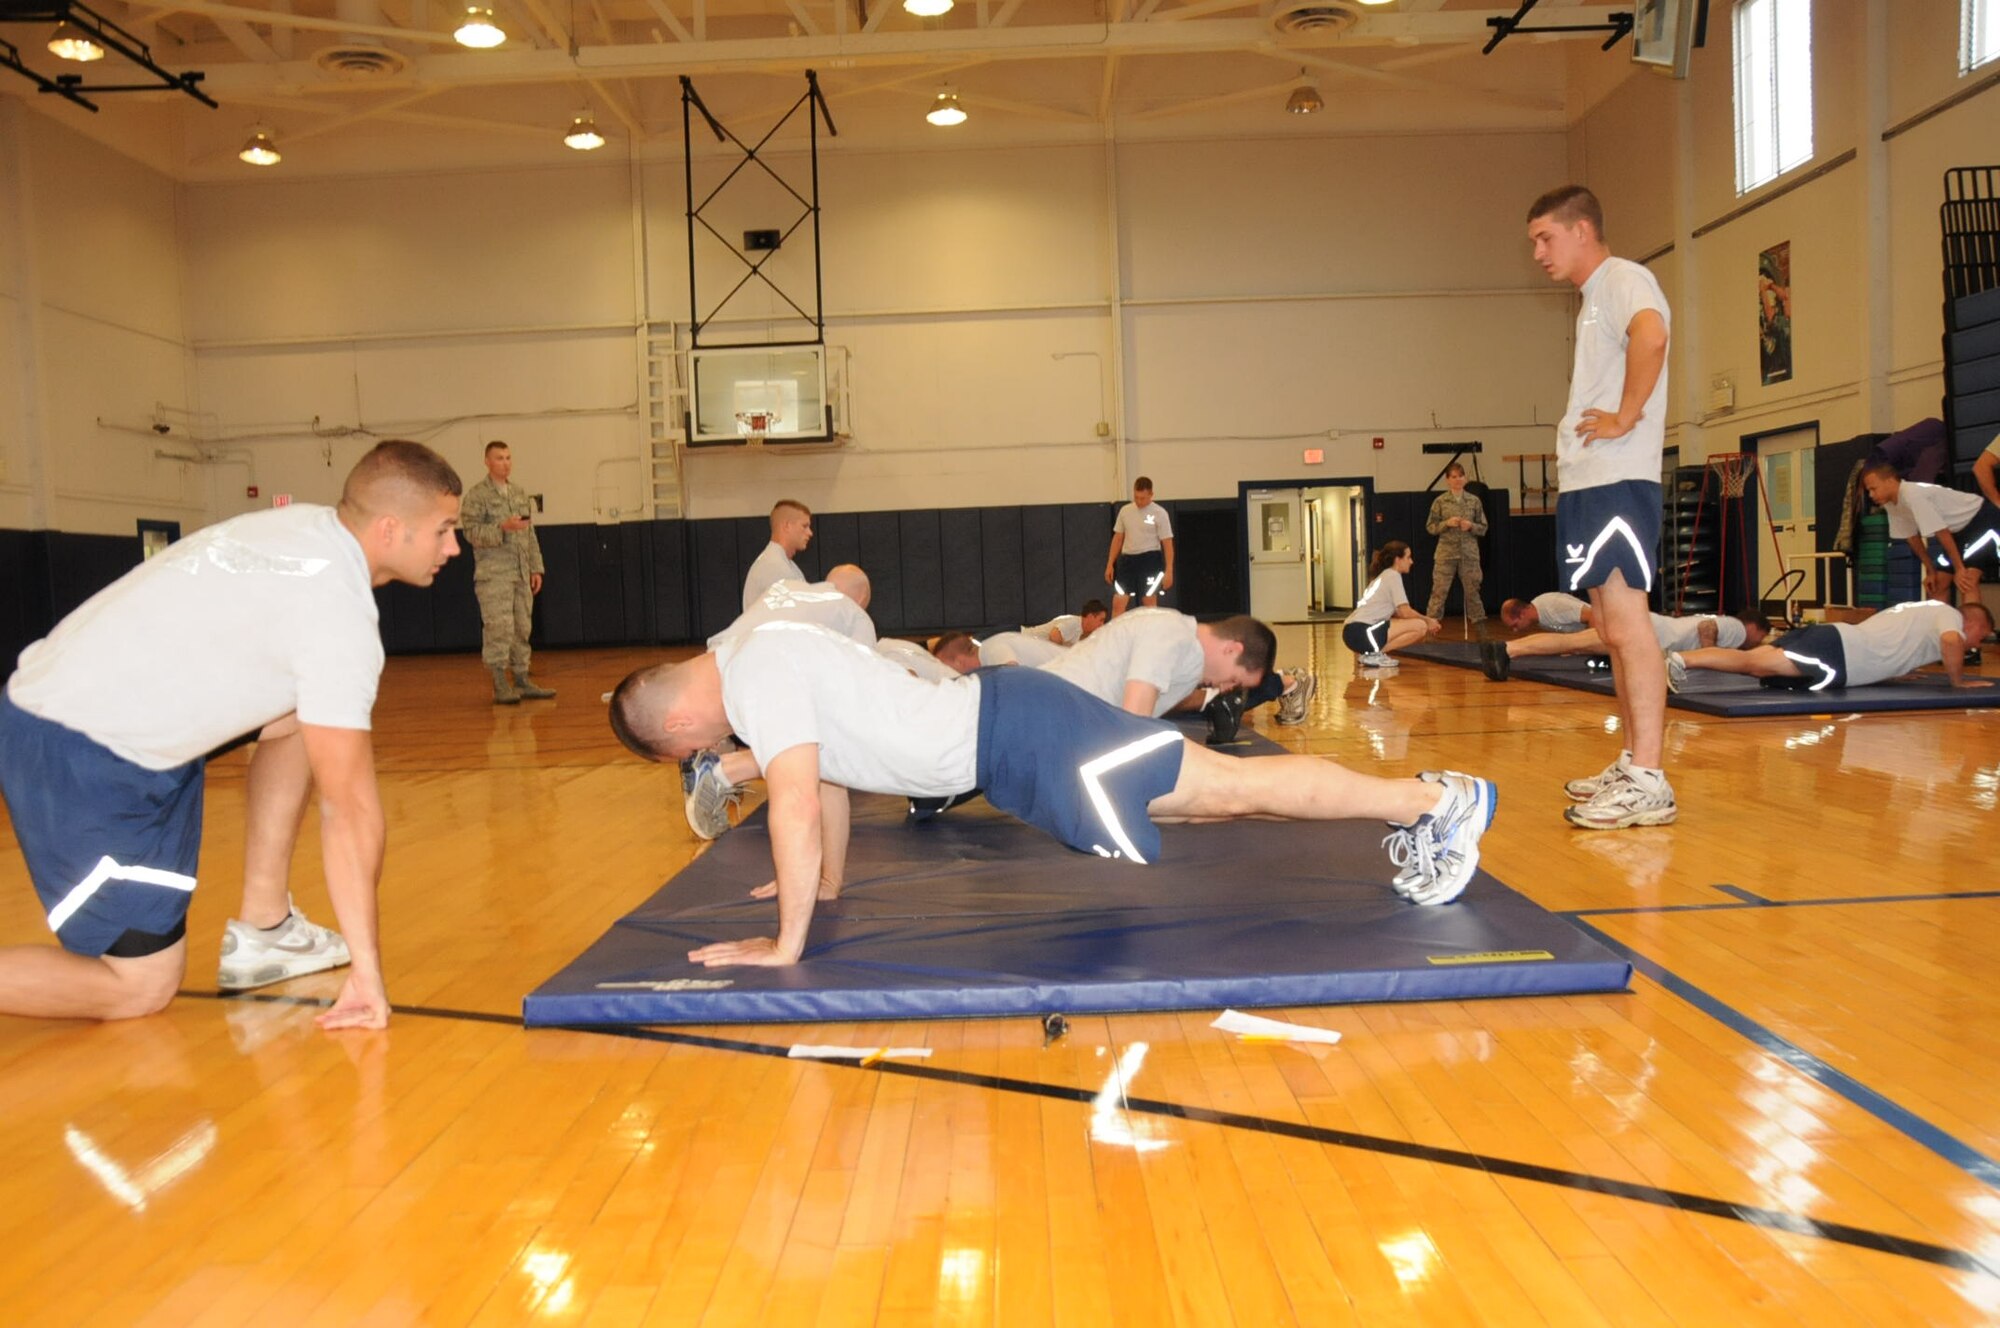 107th members conduct their physical training test at the base fitness center during the UTA weekend. Fitness monitors count pushups and make corrections as needed. (Air Force Photo/SMSgt Ray Lloyd)